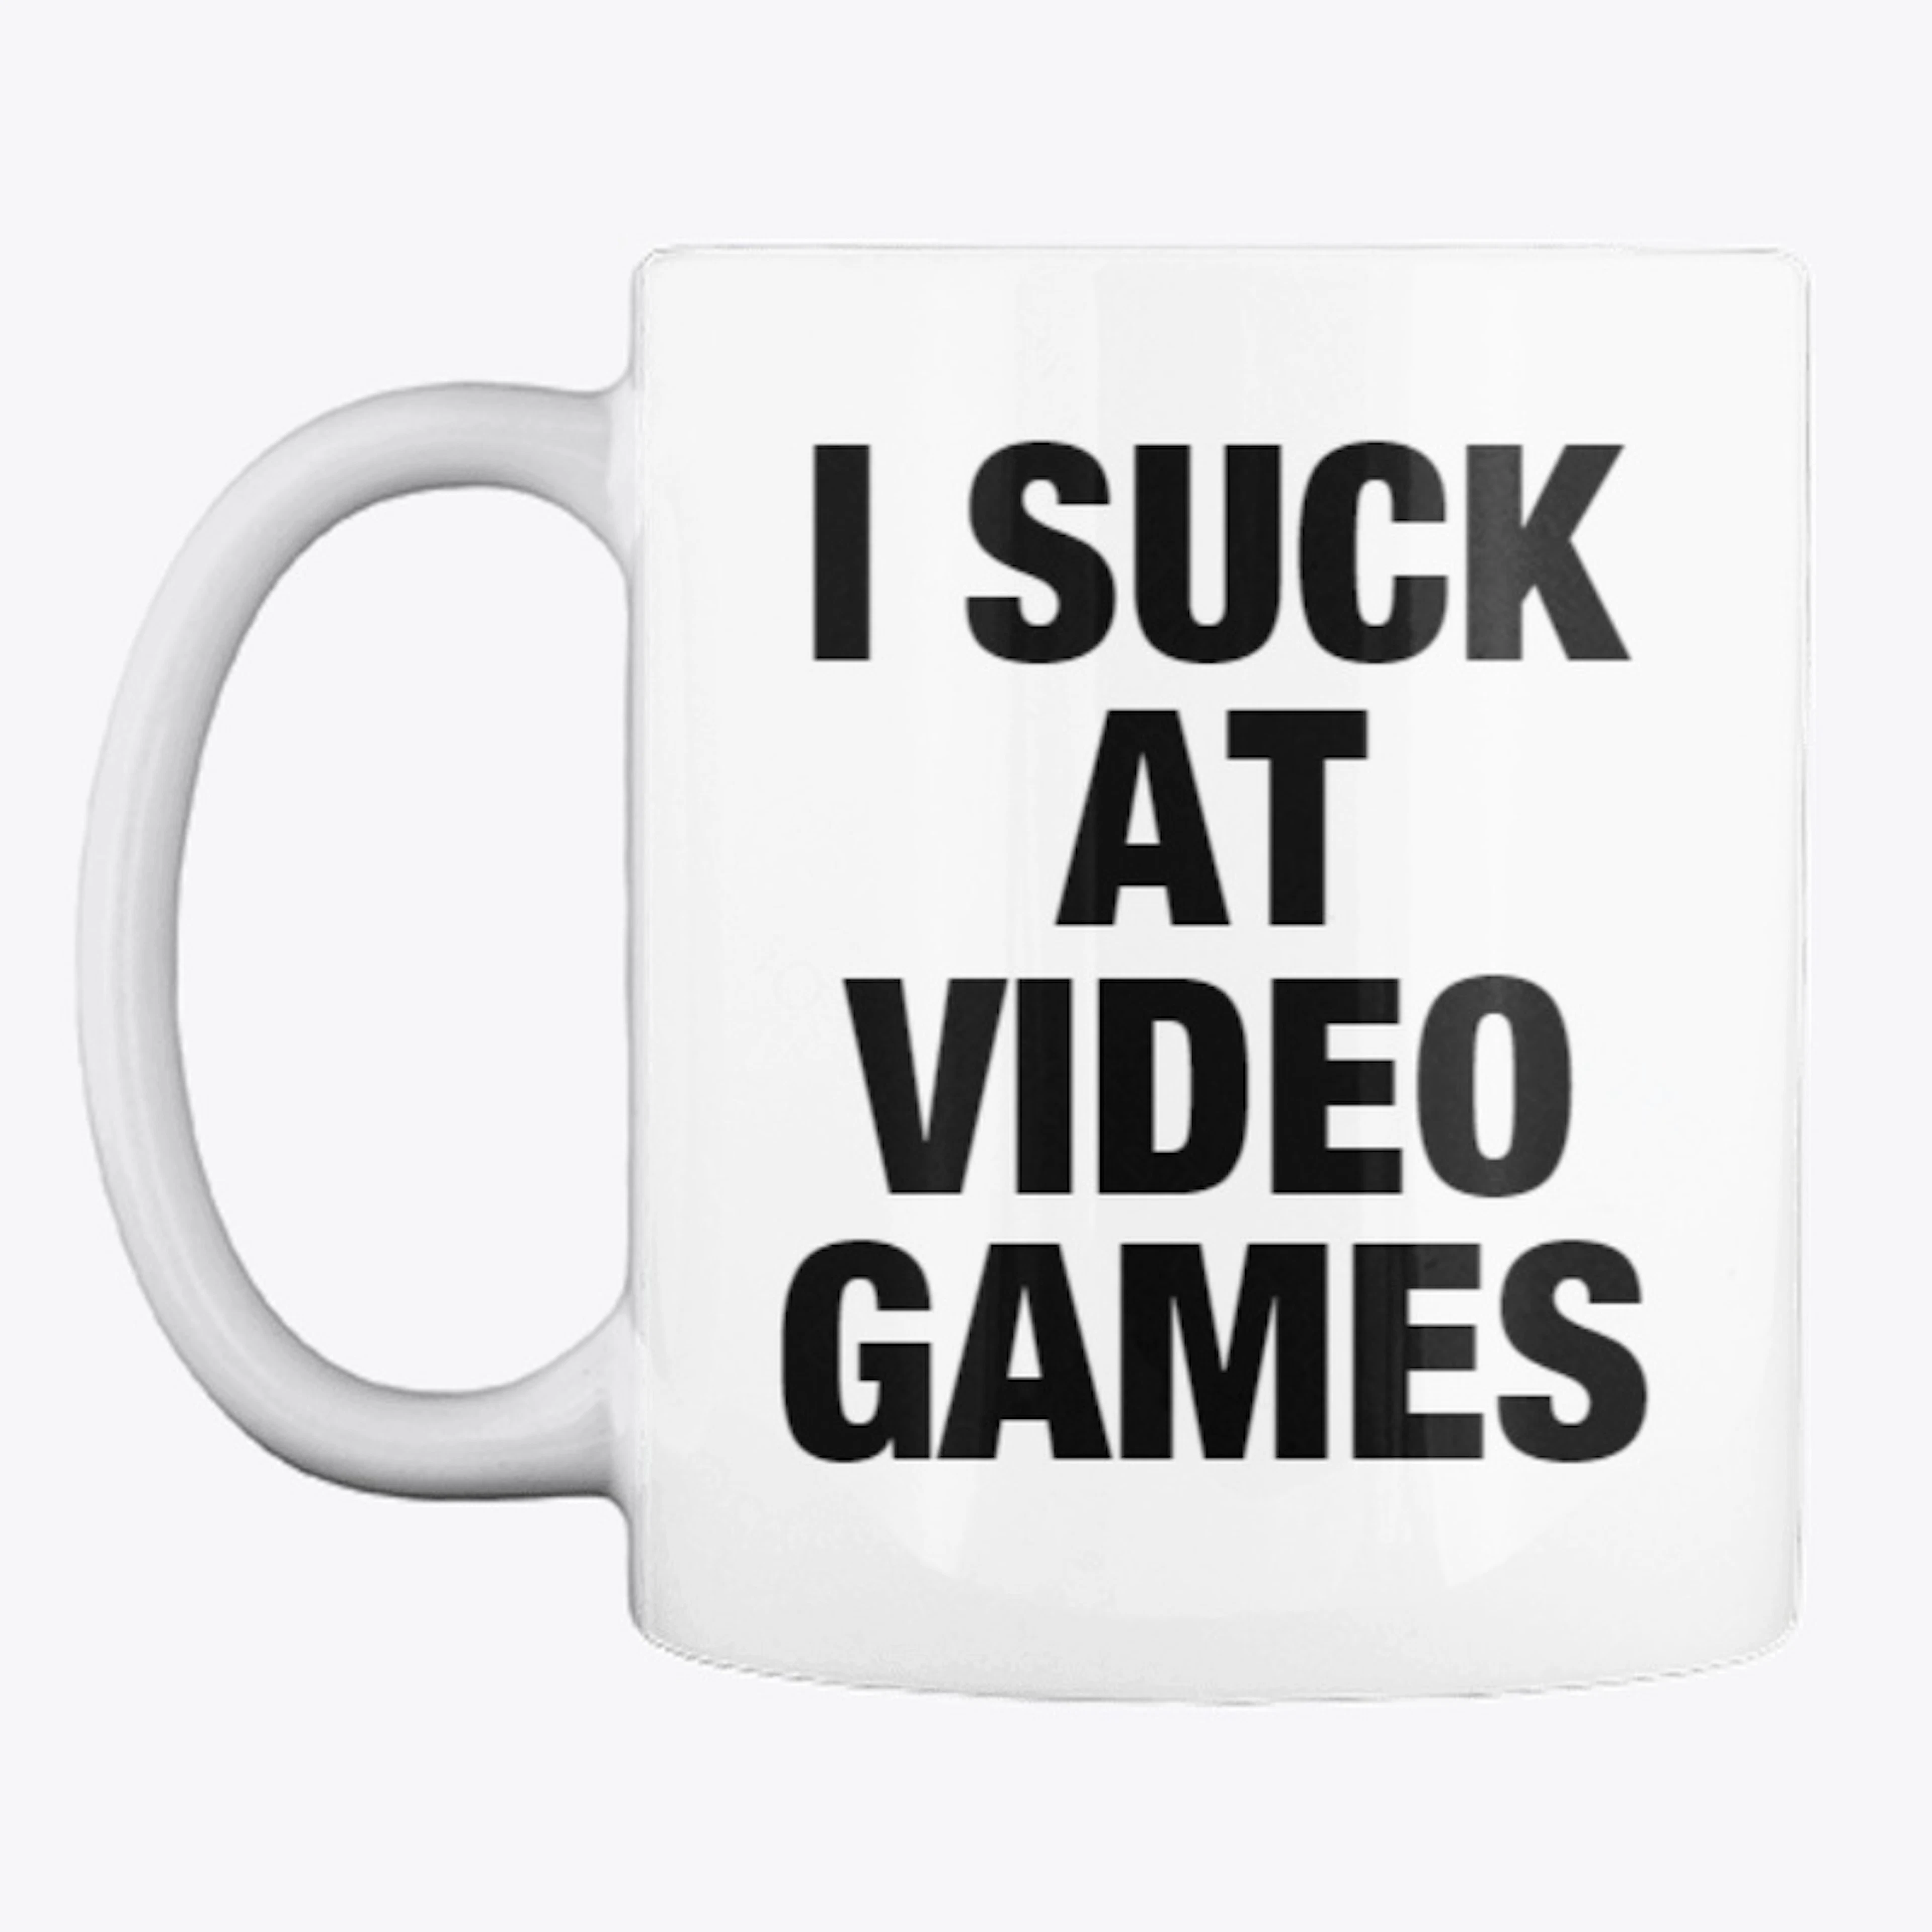 I SUCK AT VIDEO GAMES!